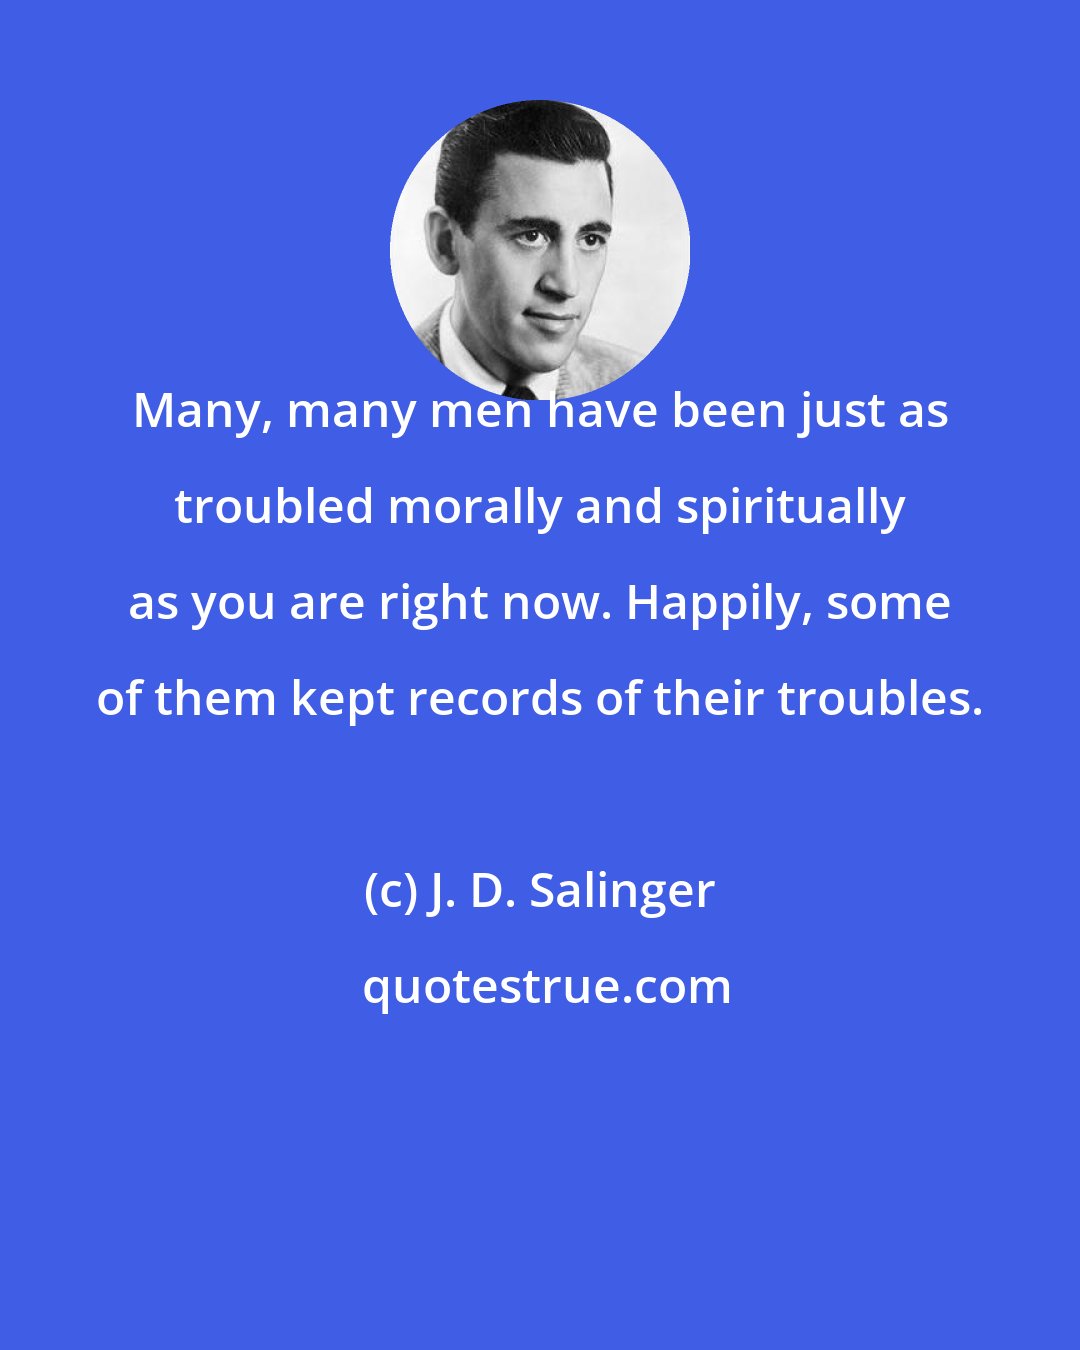 J. D. Salinger: Many, many men have been just as troubled morally and spiritually as you are right now. Happily, some of them kept records of their troubles.